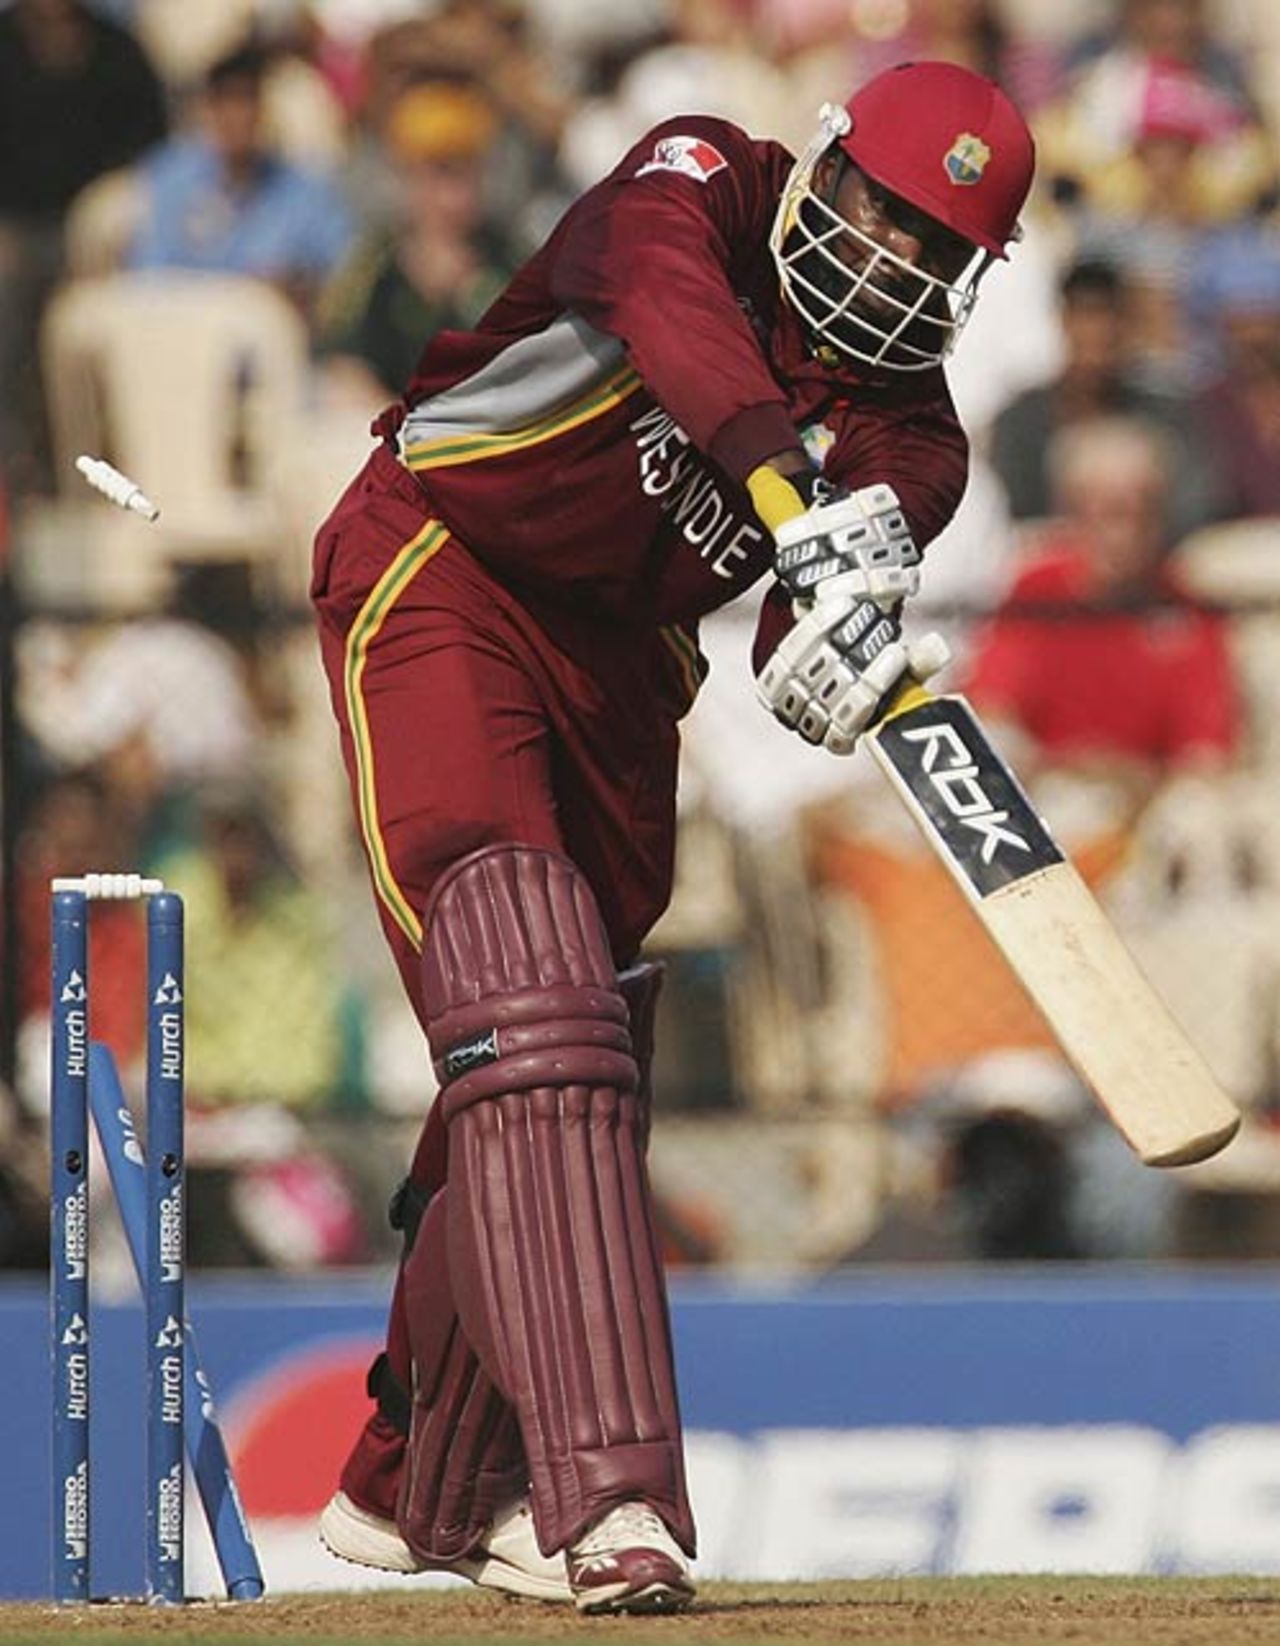 Chris Gayle was bowled for 37 off 27 balls, West Indies v Australia, Champions Trophy final, Mumbai, November 5, 2006